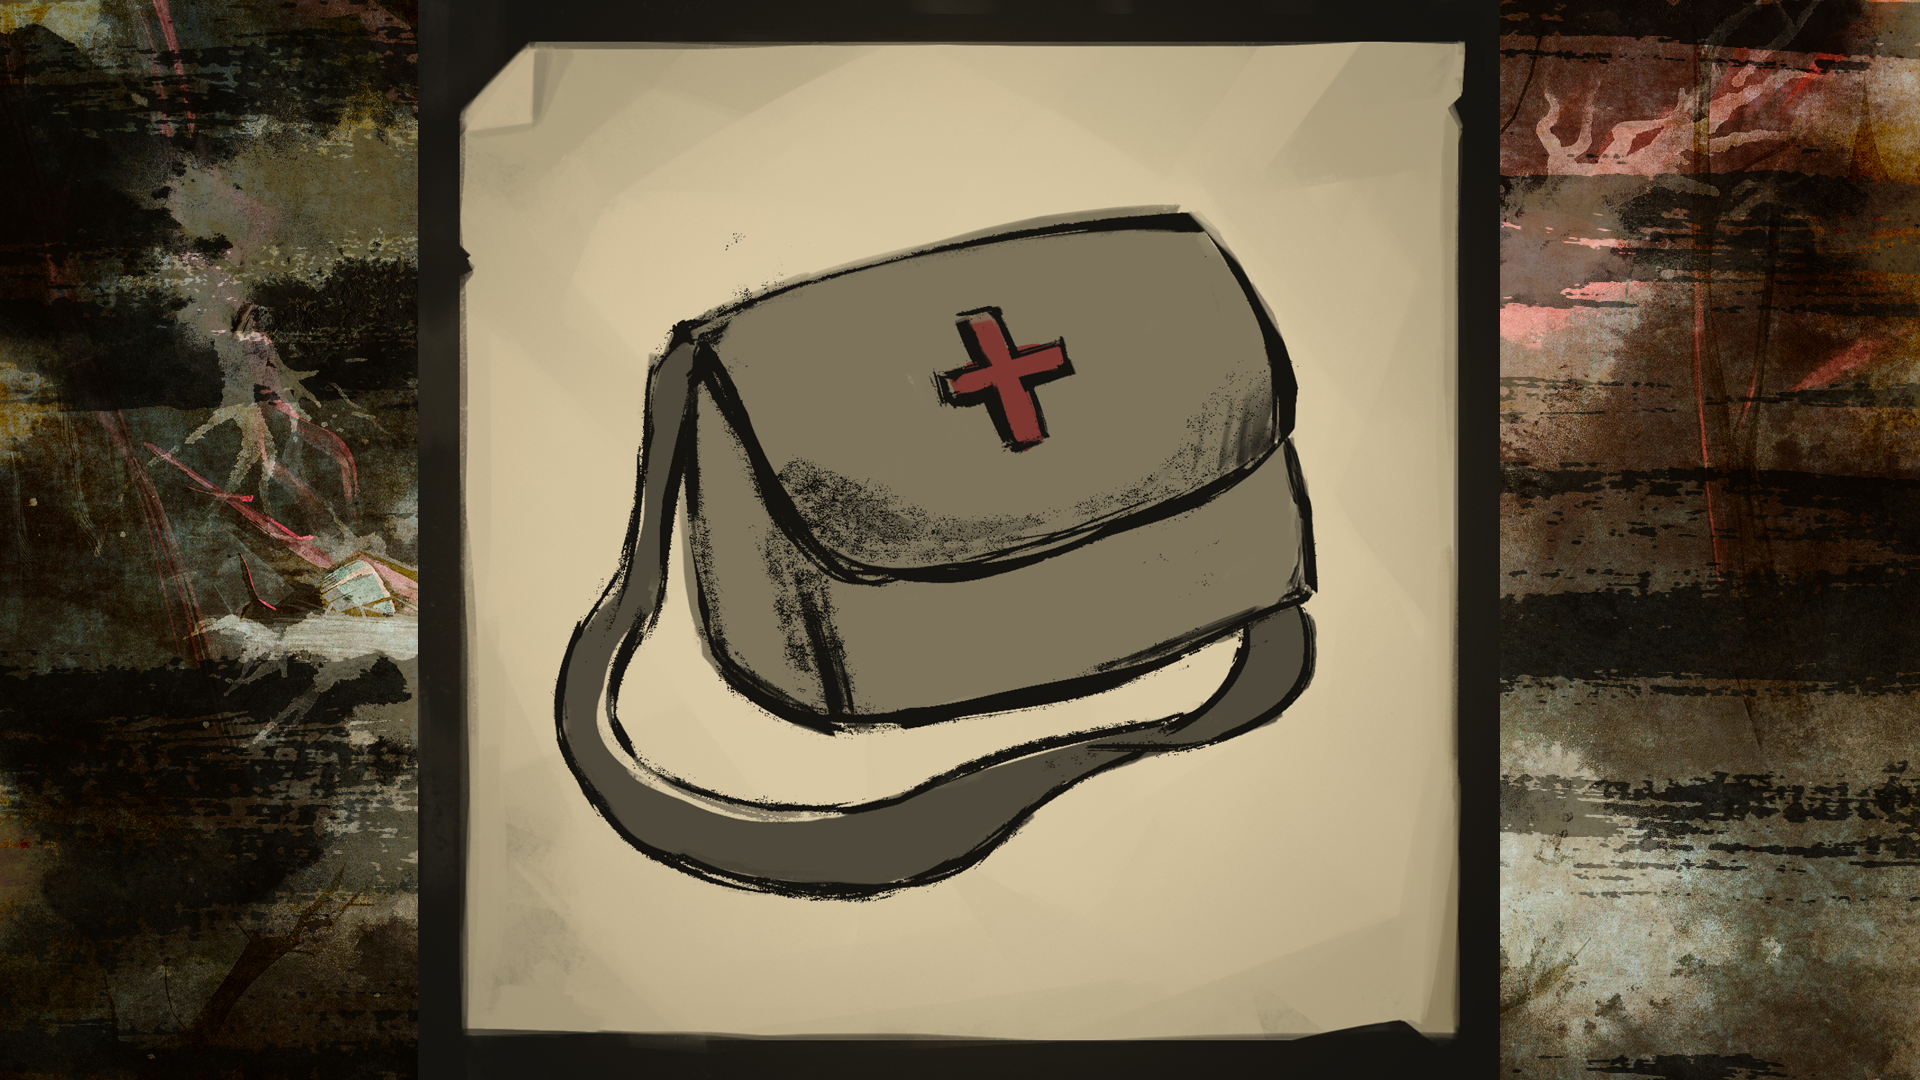 Icon for First aid